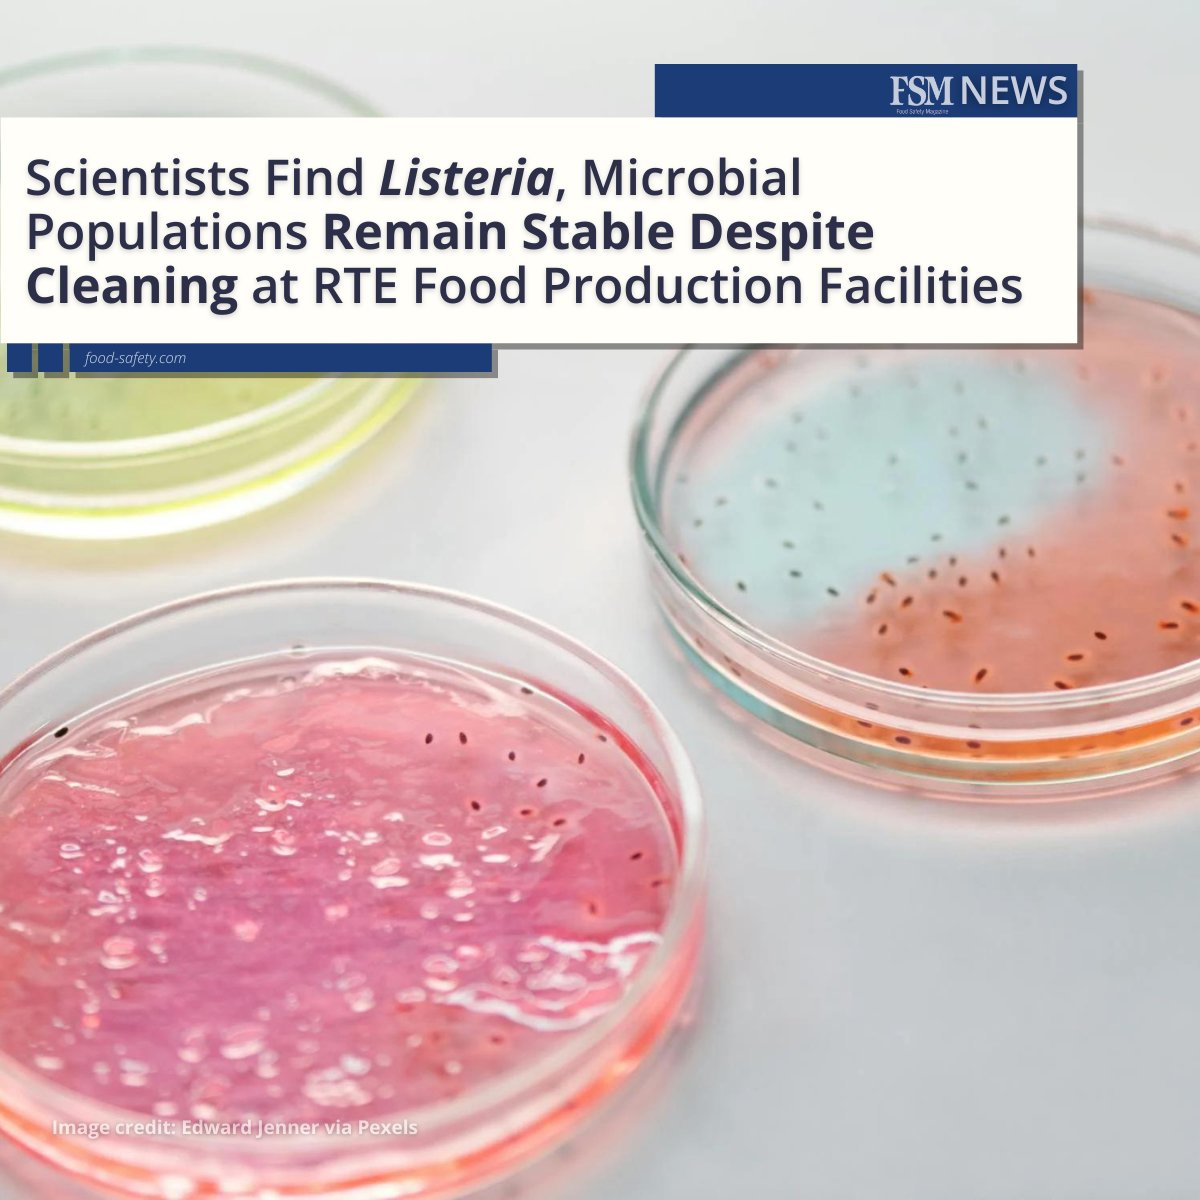 #ICYMI: ' ... Since #Listeria are supported by a stable community of other bacteria, to fully eliminate the pathogen from a facility, it may be necessary to develop new strategies to alter entire bacterial populations.' 🔬💡👉 brnw.ch/21wJGvK

#foodsafety